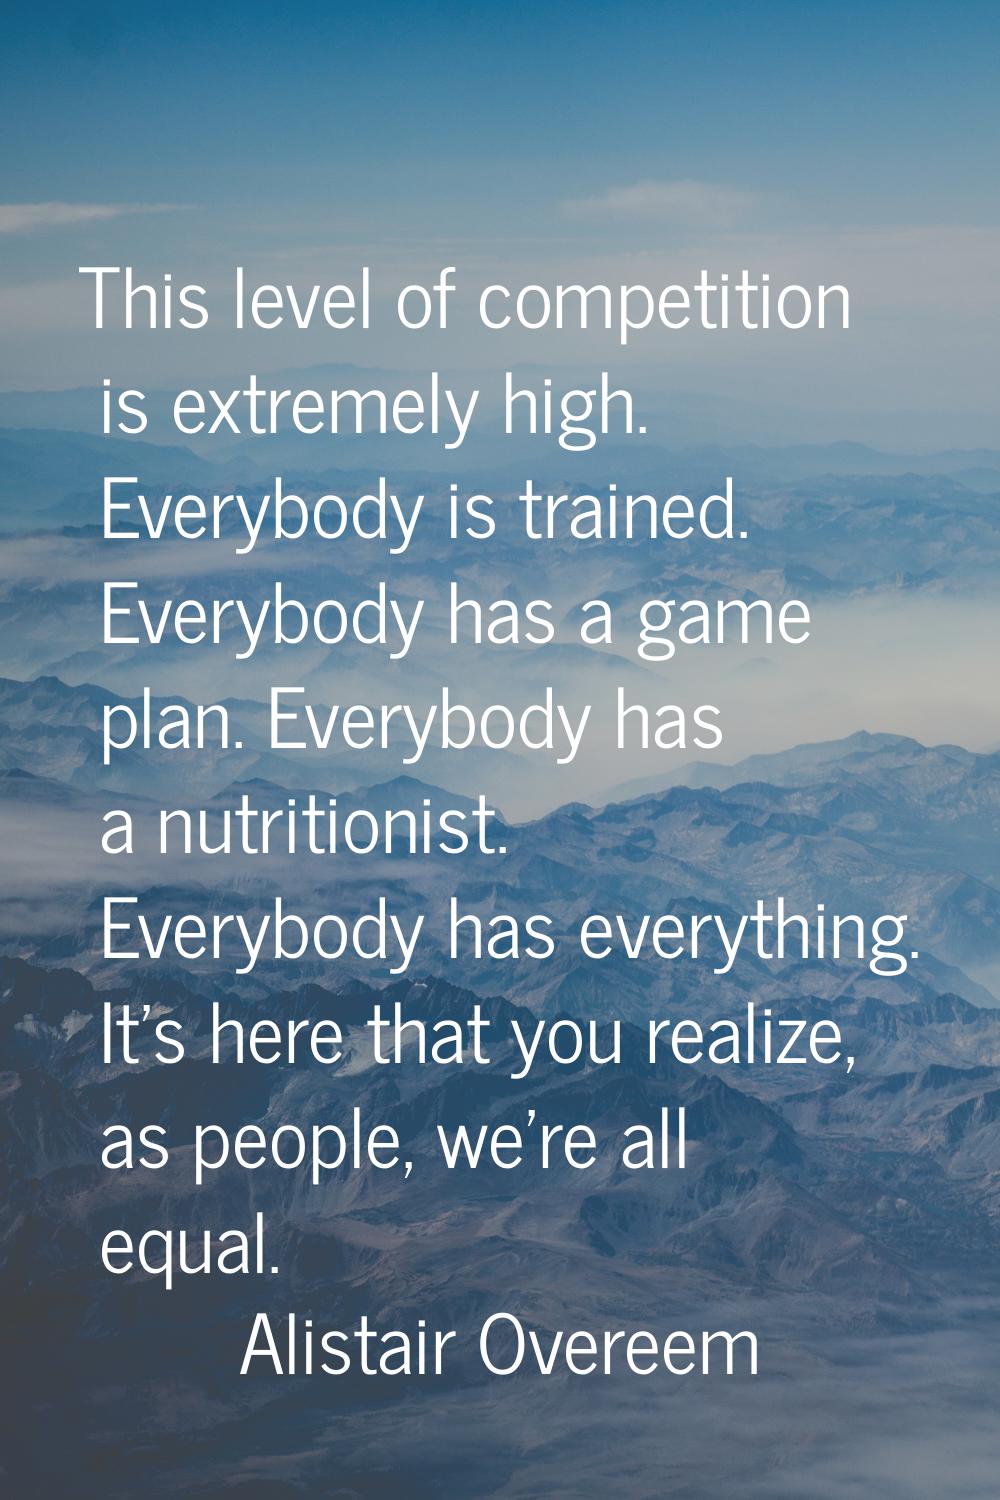 This level of competition is extremely high. Everybody is trained. Everybody has a game plan. Every